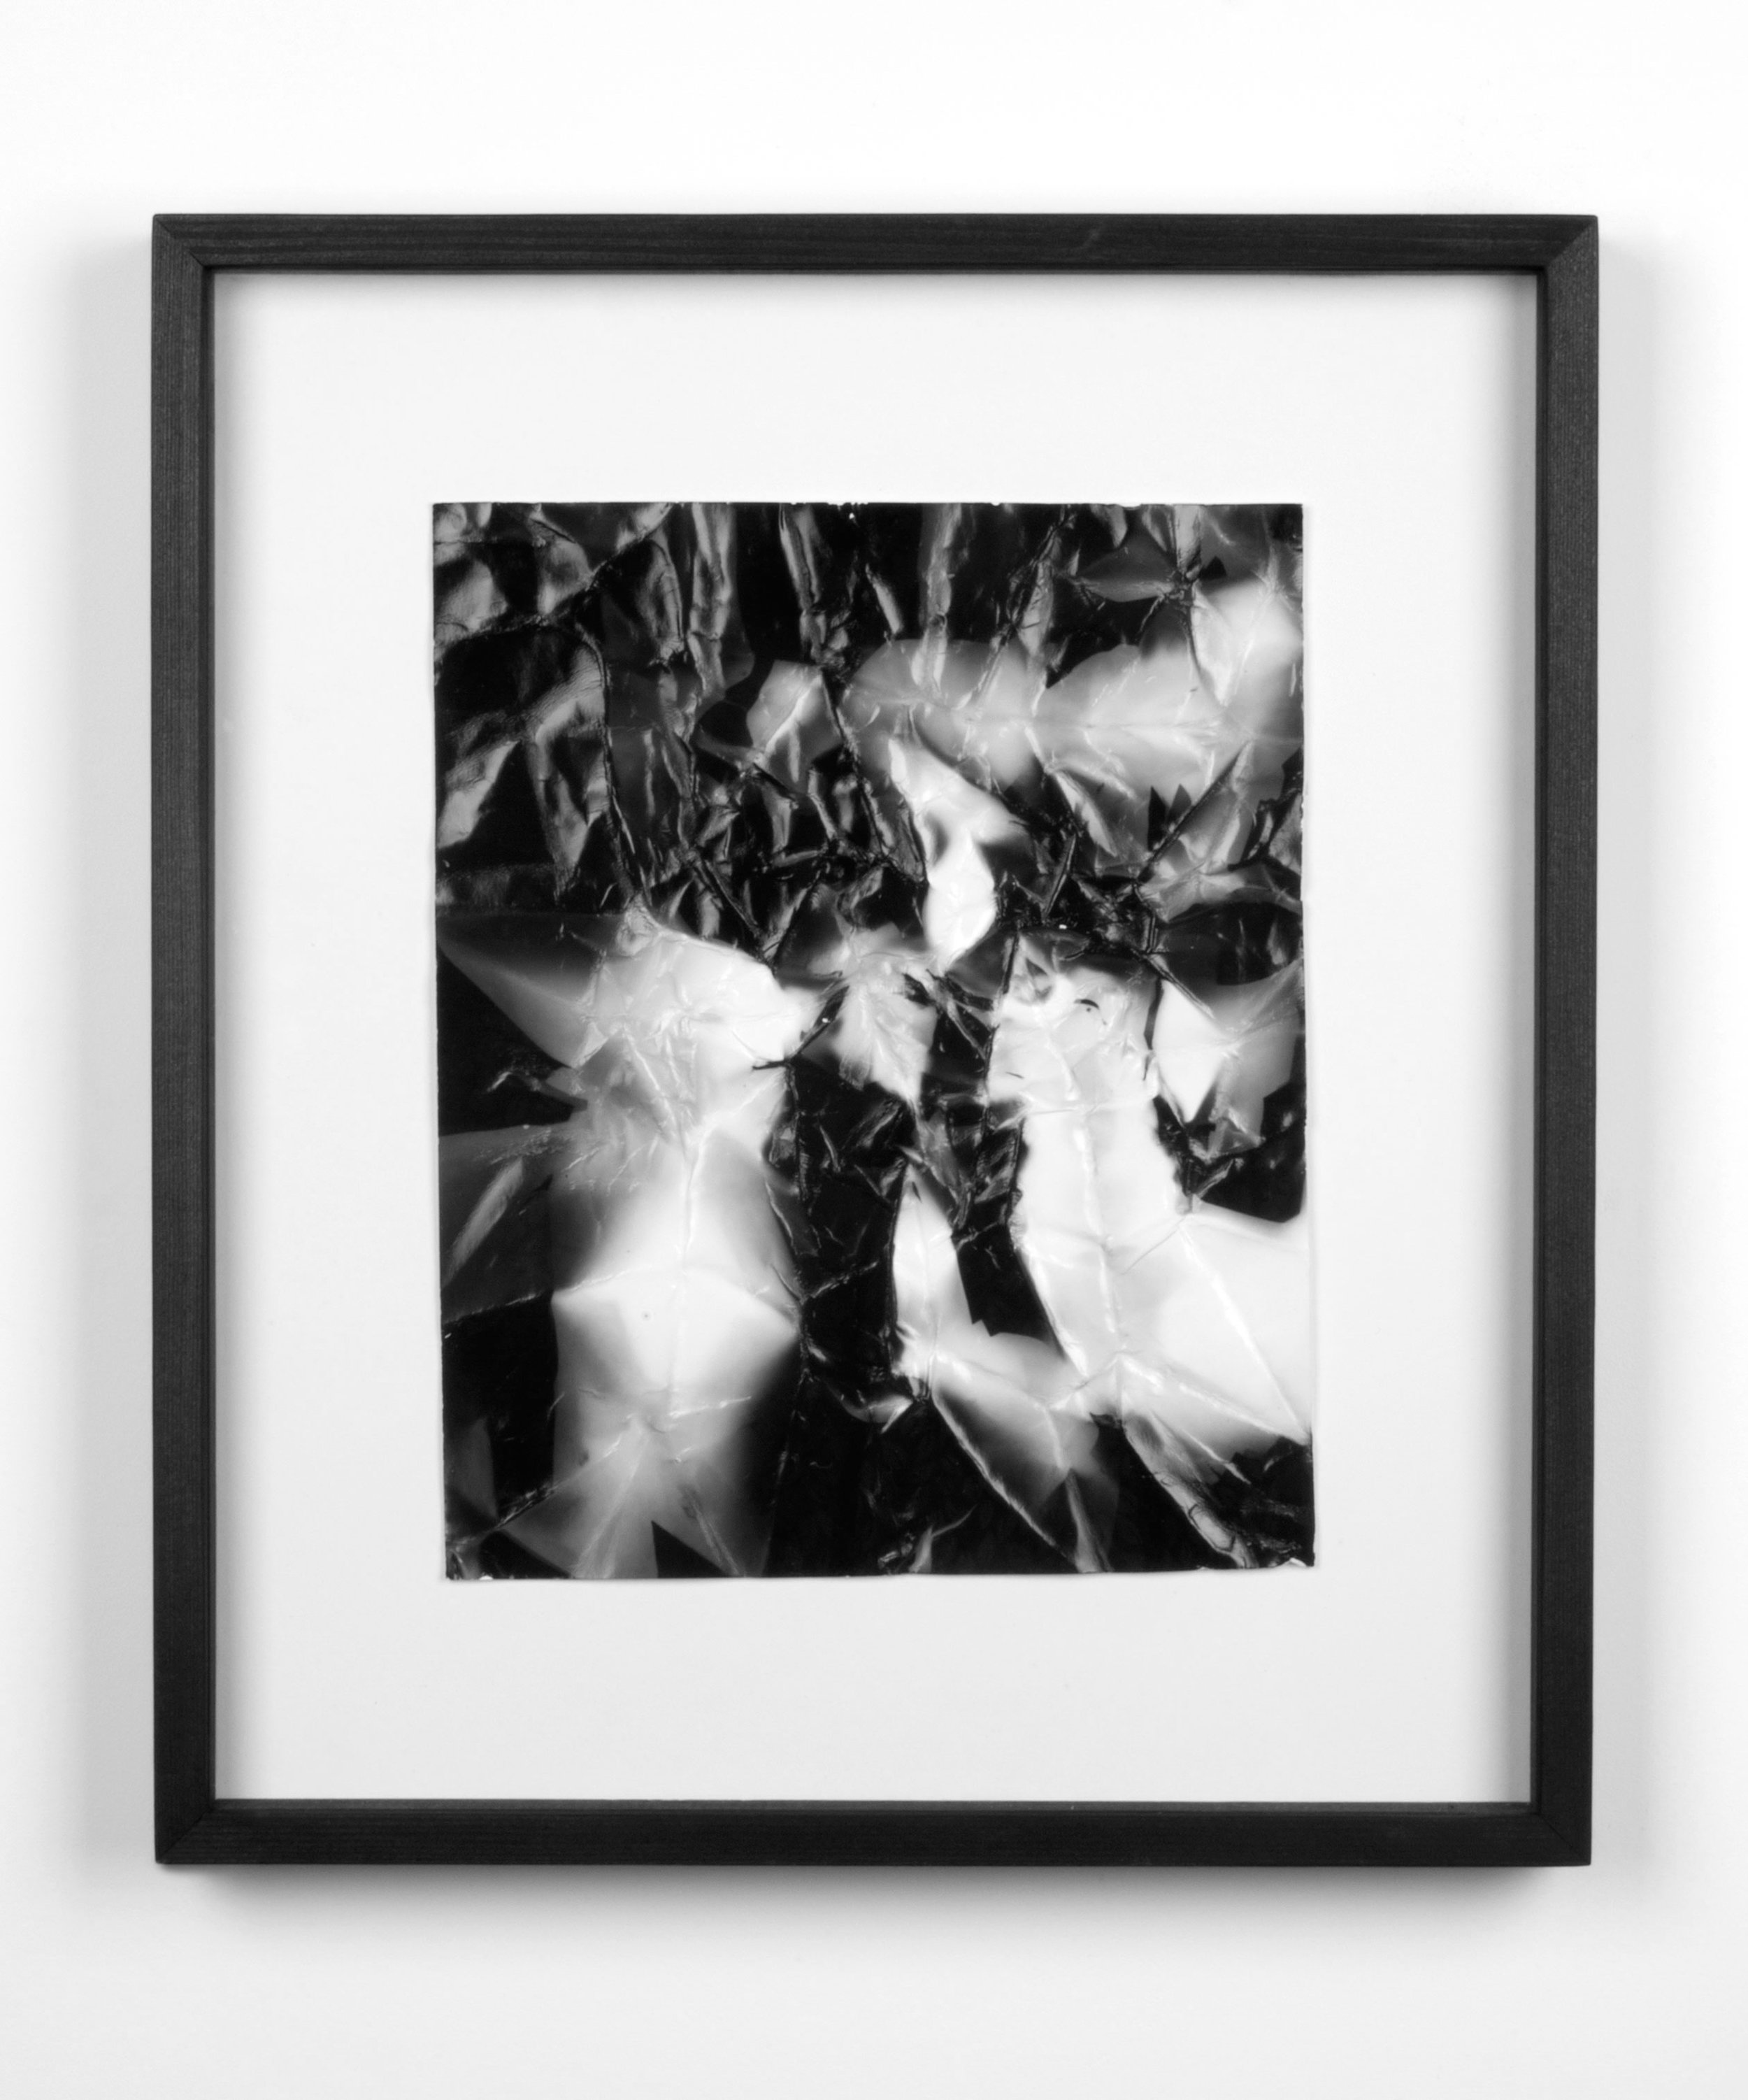   Picture Made by My Hand with the Assistance of Light   2011  Black and white fiber based photographic paper  14 7/8 x 12 7/8 inches   Pictures Made by My Hand with the Assistance of Light, 2005–2014    A Diagram of Forces, 2011     